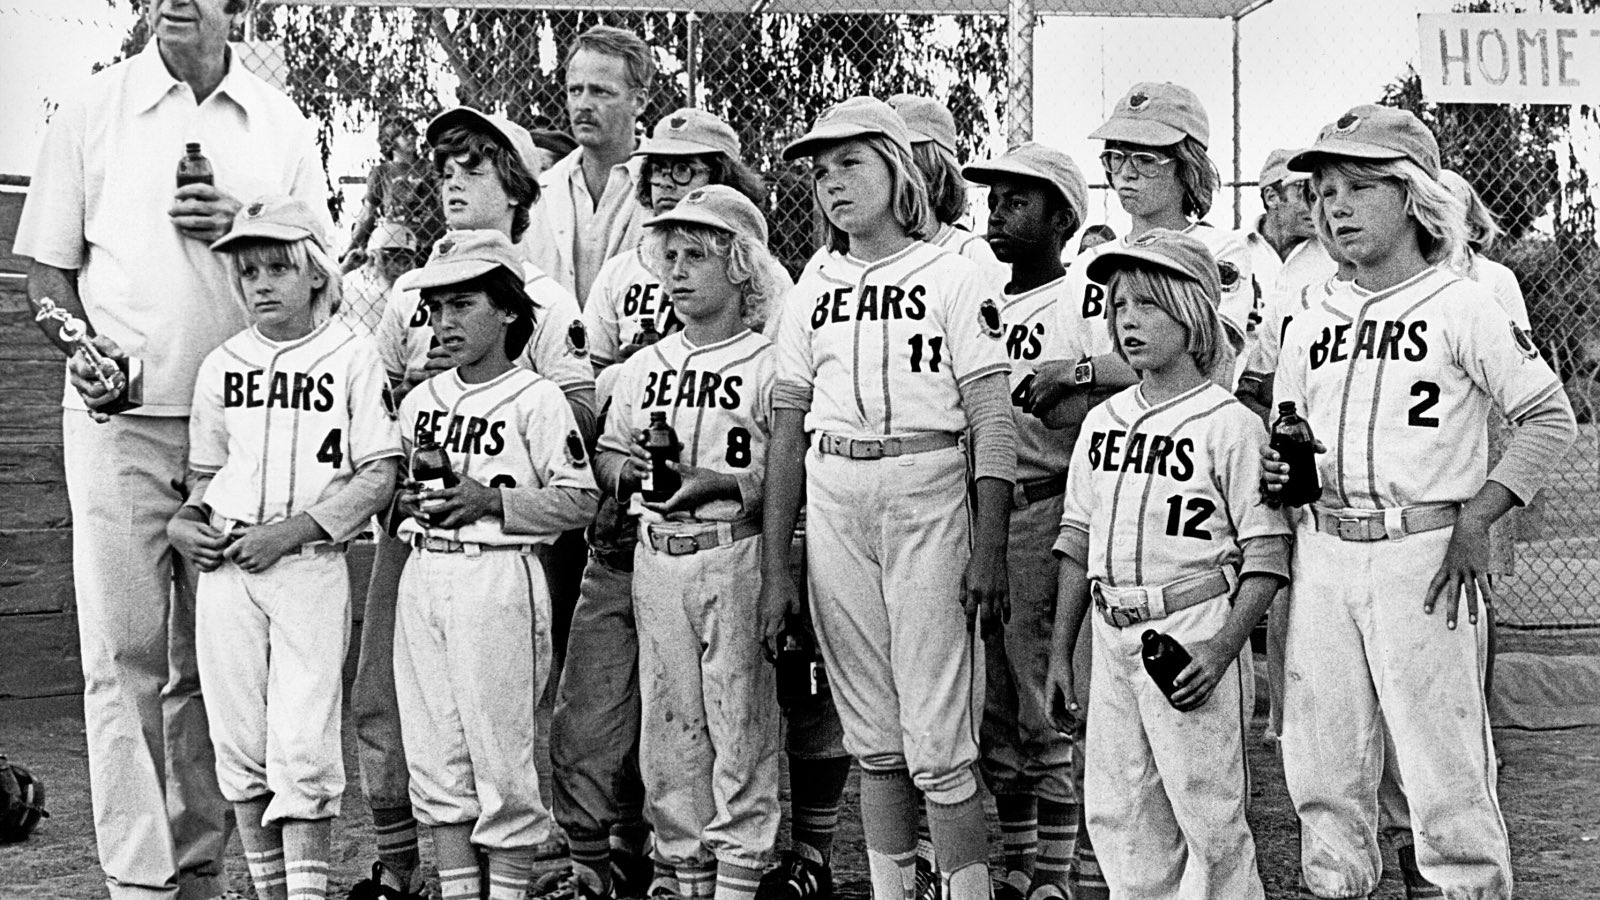 10 Most Iconic Fictional Sports Team Uniforms of All Time